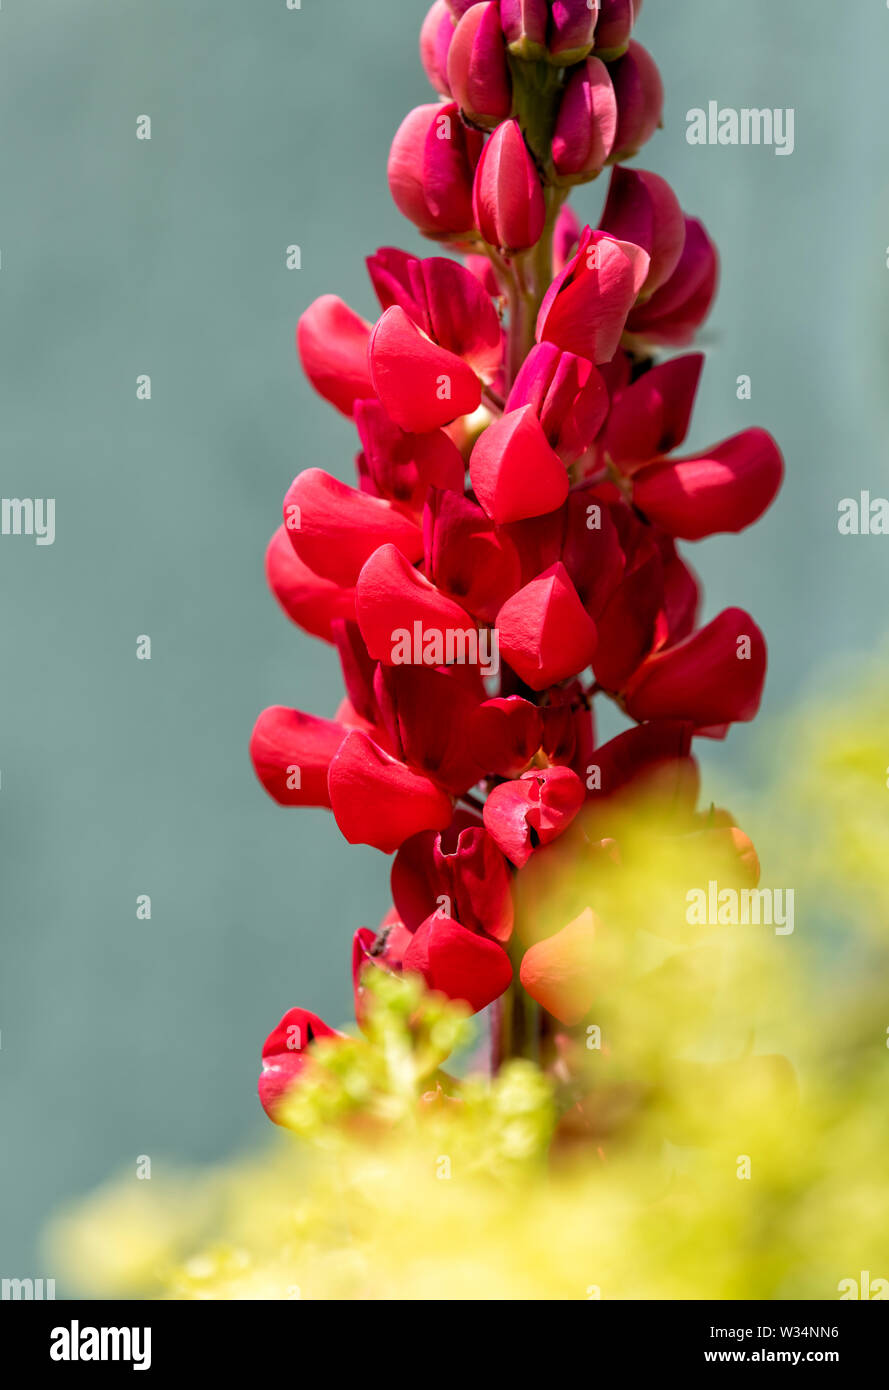 Red Lupin flower in full bloom Stock Photo